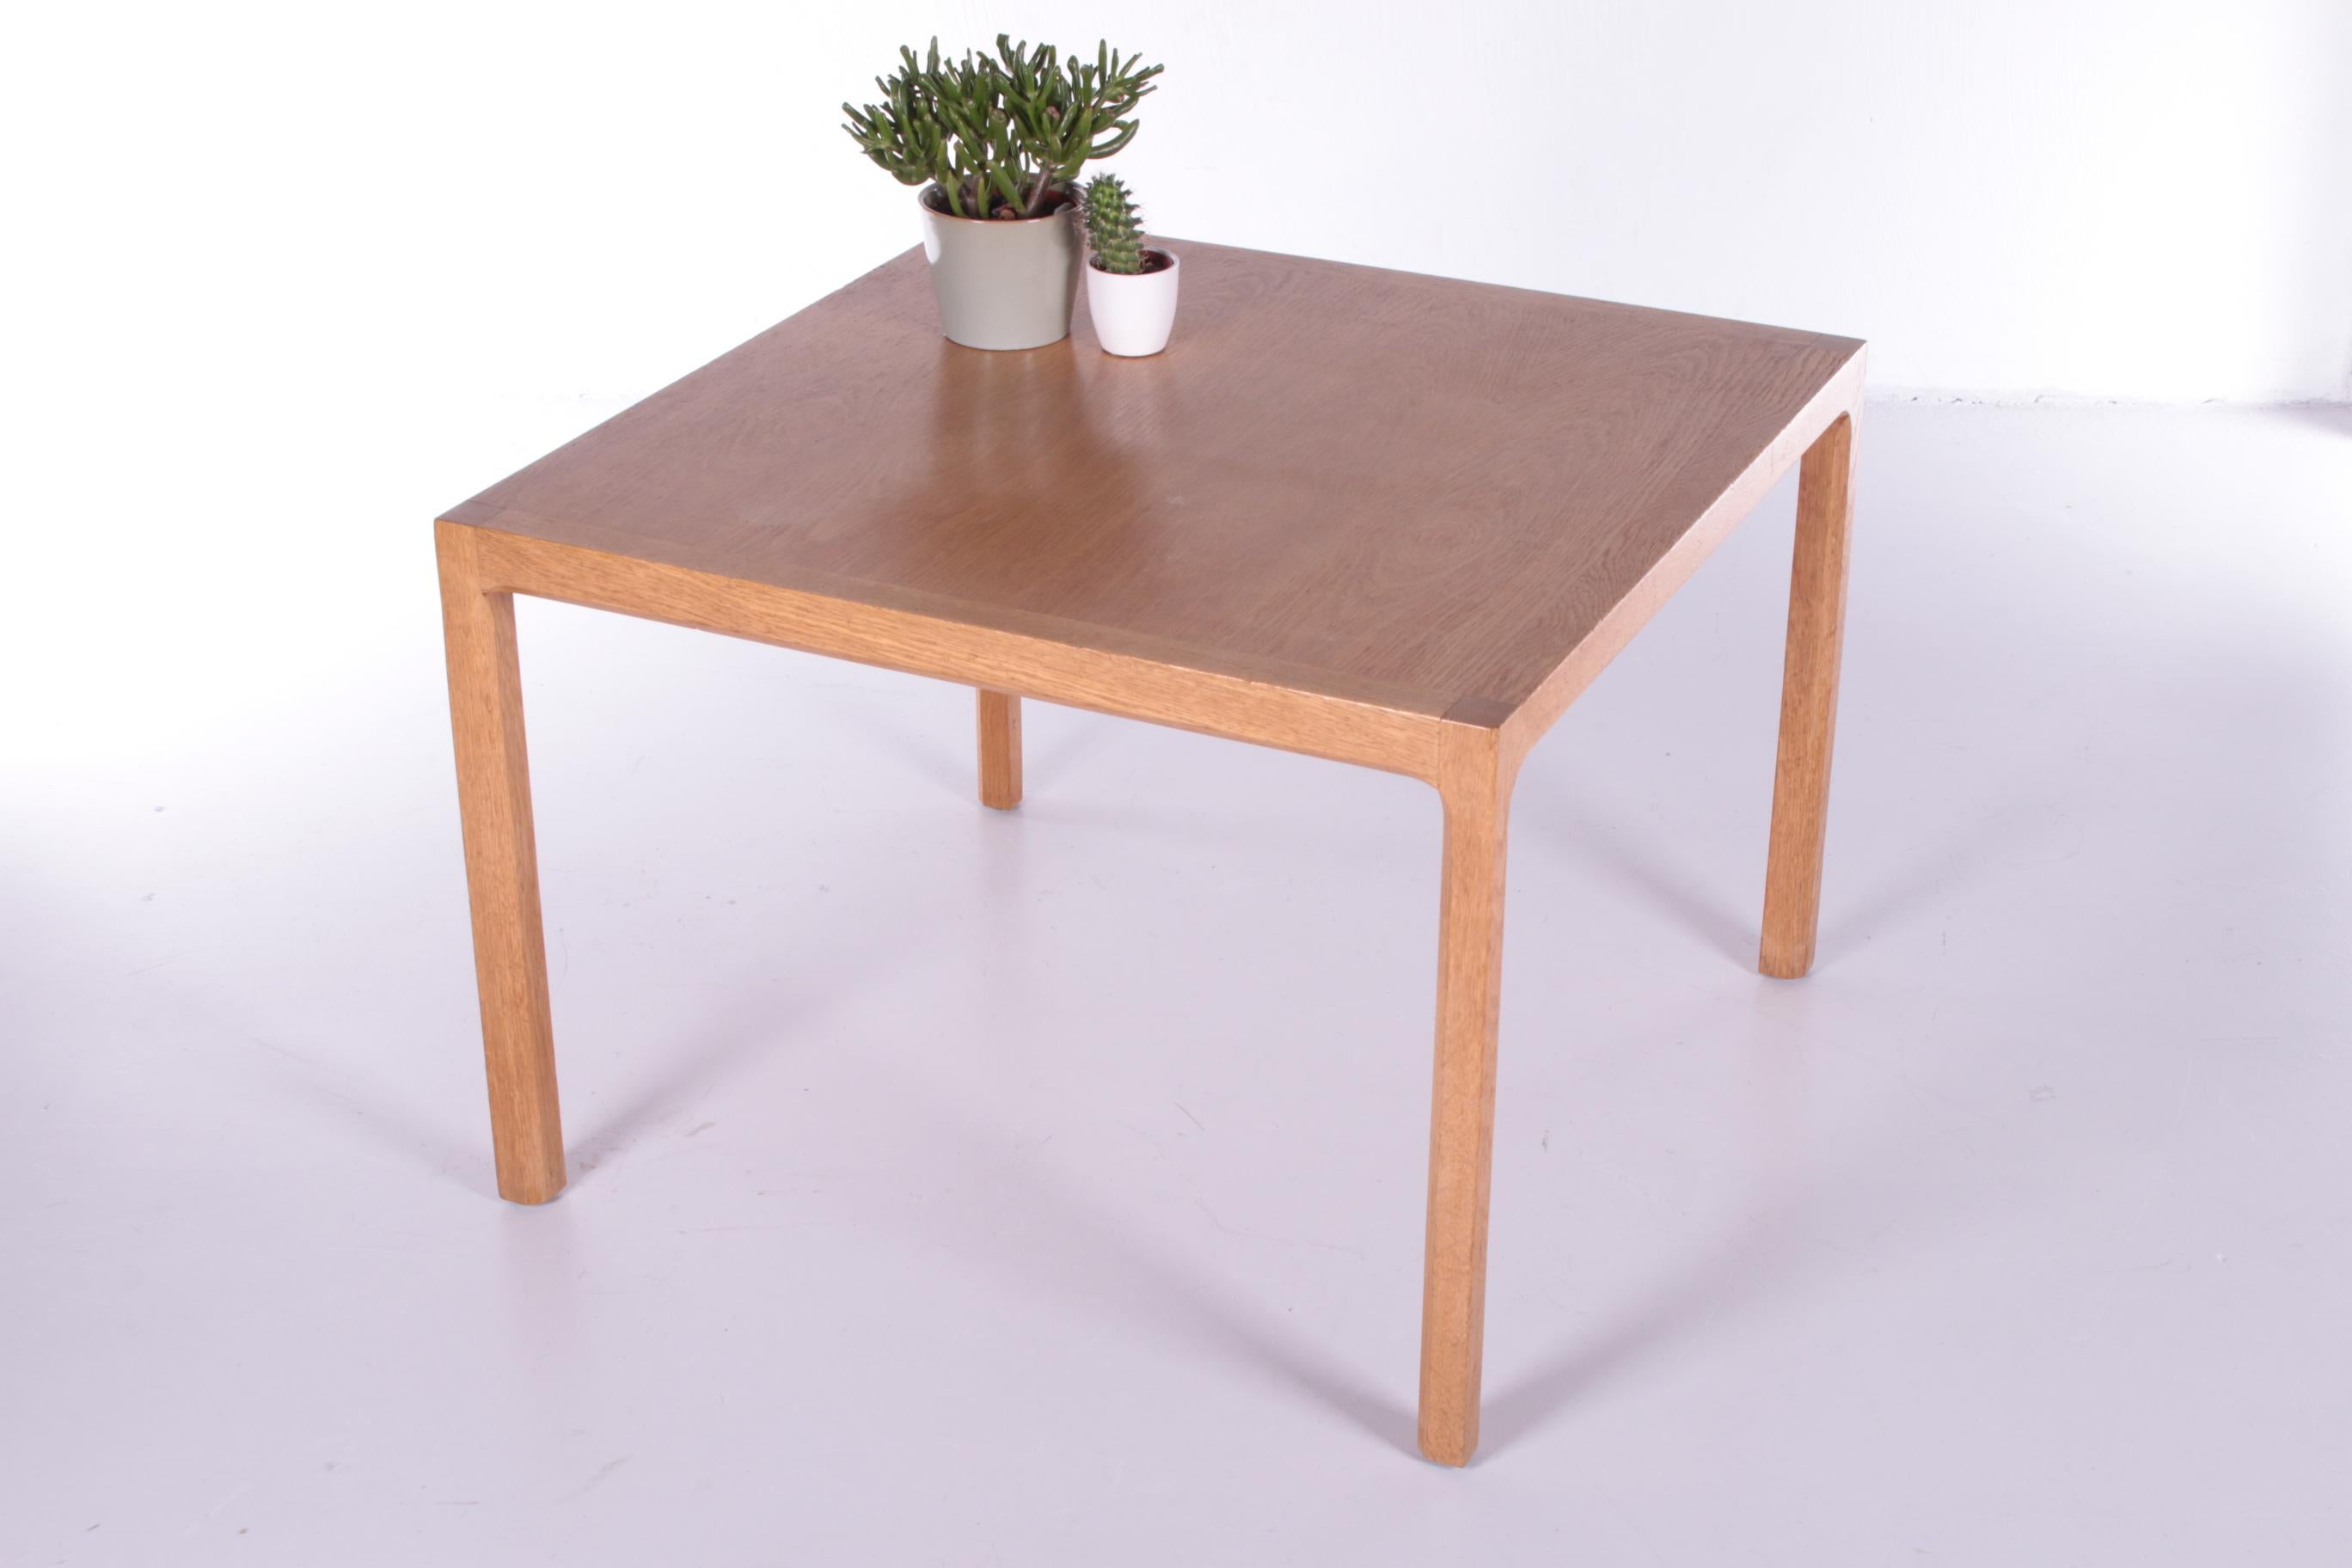 Mid-century oak coffee table by Kai Kristiansen for Aksel Kjersgaard 1960s


This is a square coffee table designed by Kai Kristiansen made by Aksel Kjersgaard.

Beautiful table made of oak a nice slim design from Denmark.

This is a